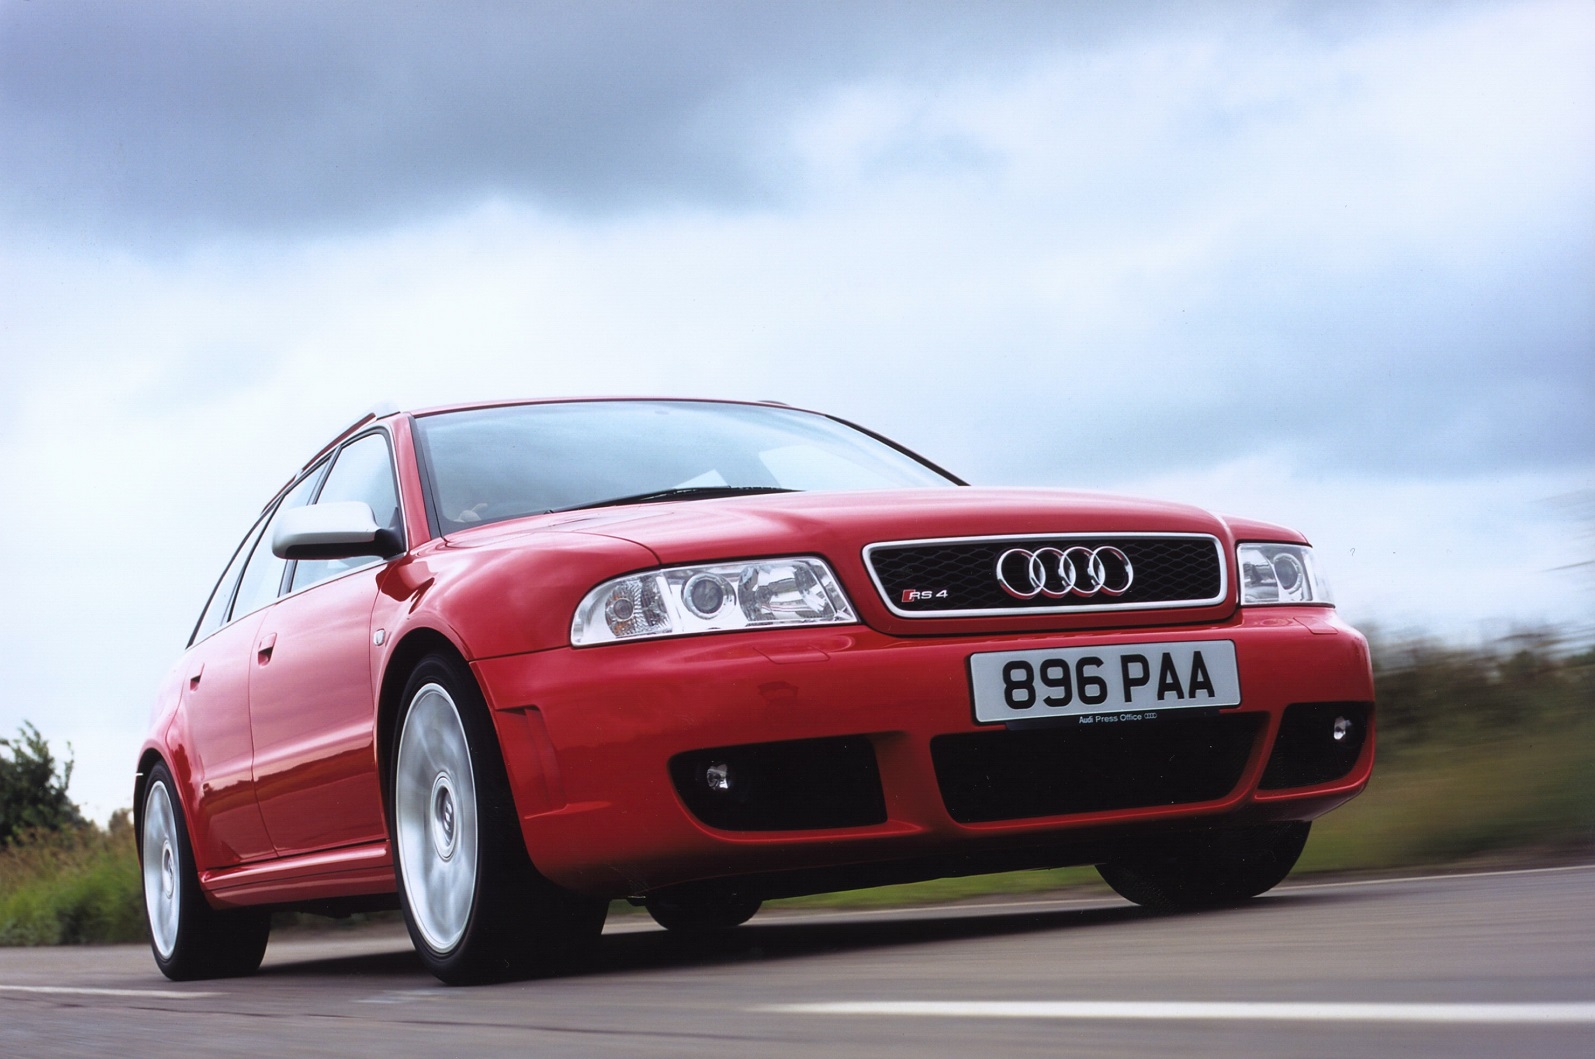 <p>It’s hard to imagine the roadscape without the Audi A4 now, yet it was launched relatively recently compared to its arch-rival, the BMW 3 Series. Even so, <strong>A4 sales have increased year on year</strong>, helped by its reputation for solidity and all-wheel drive on most models.</p>